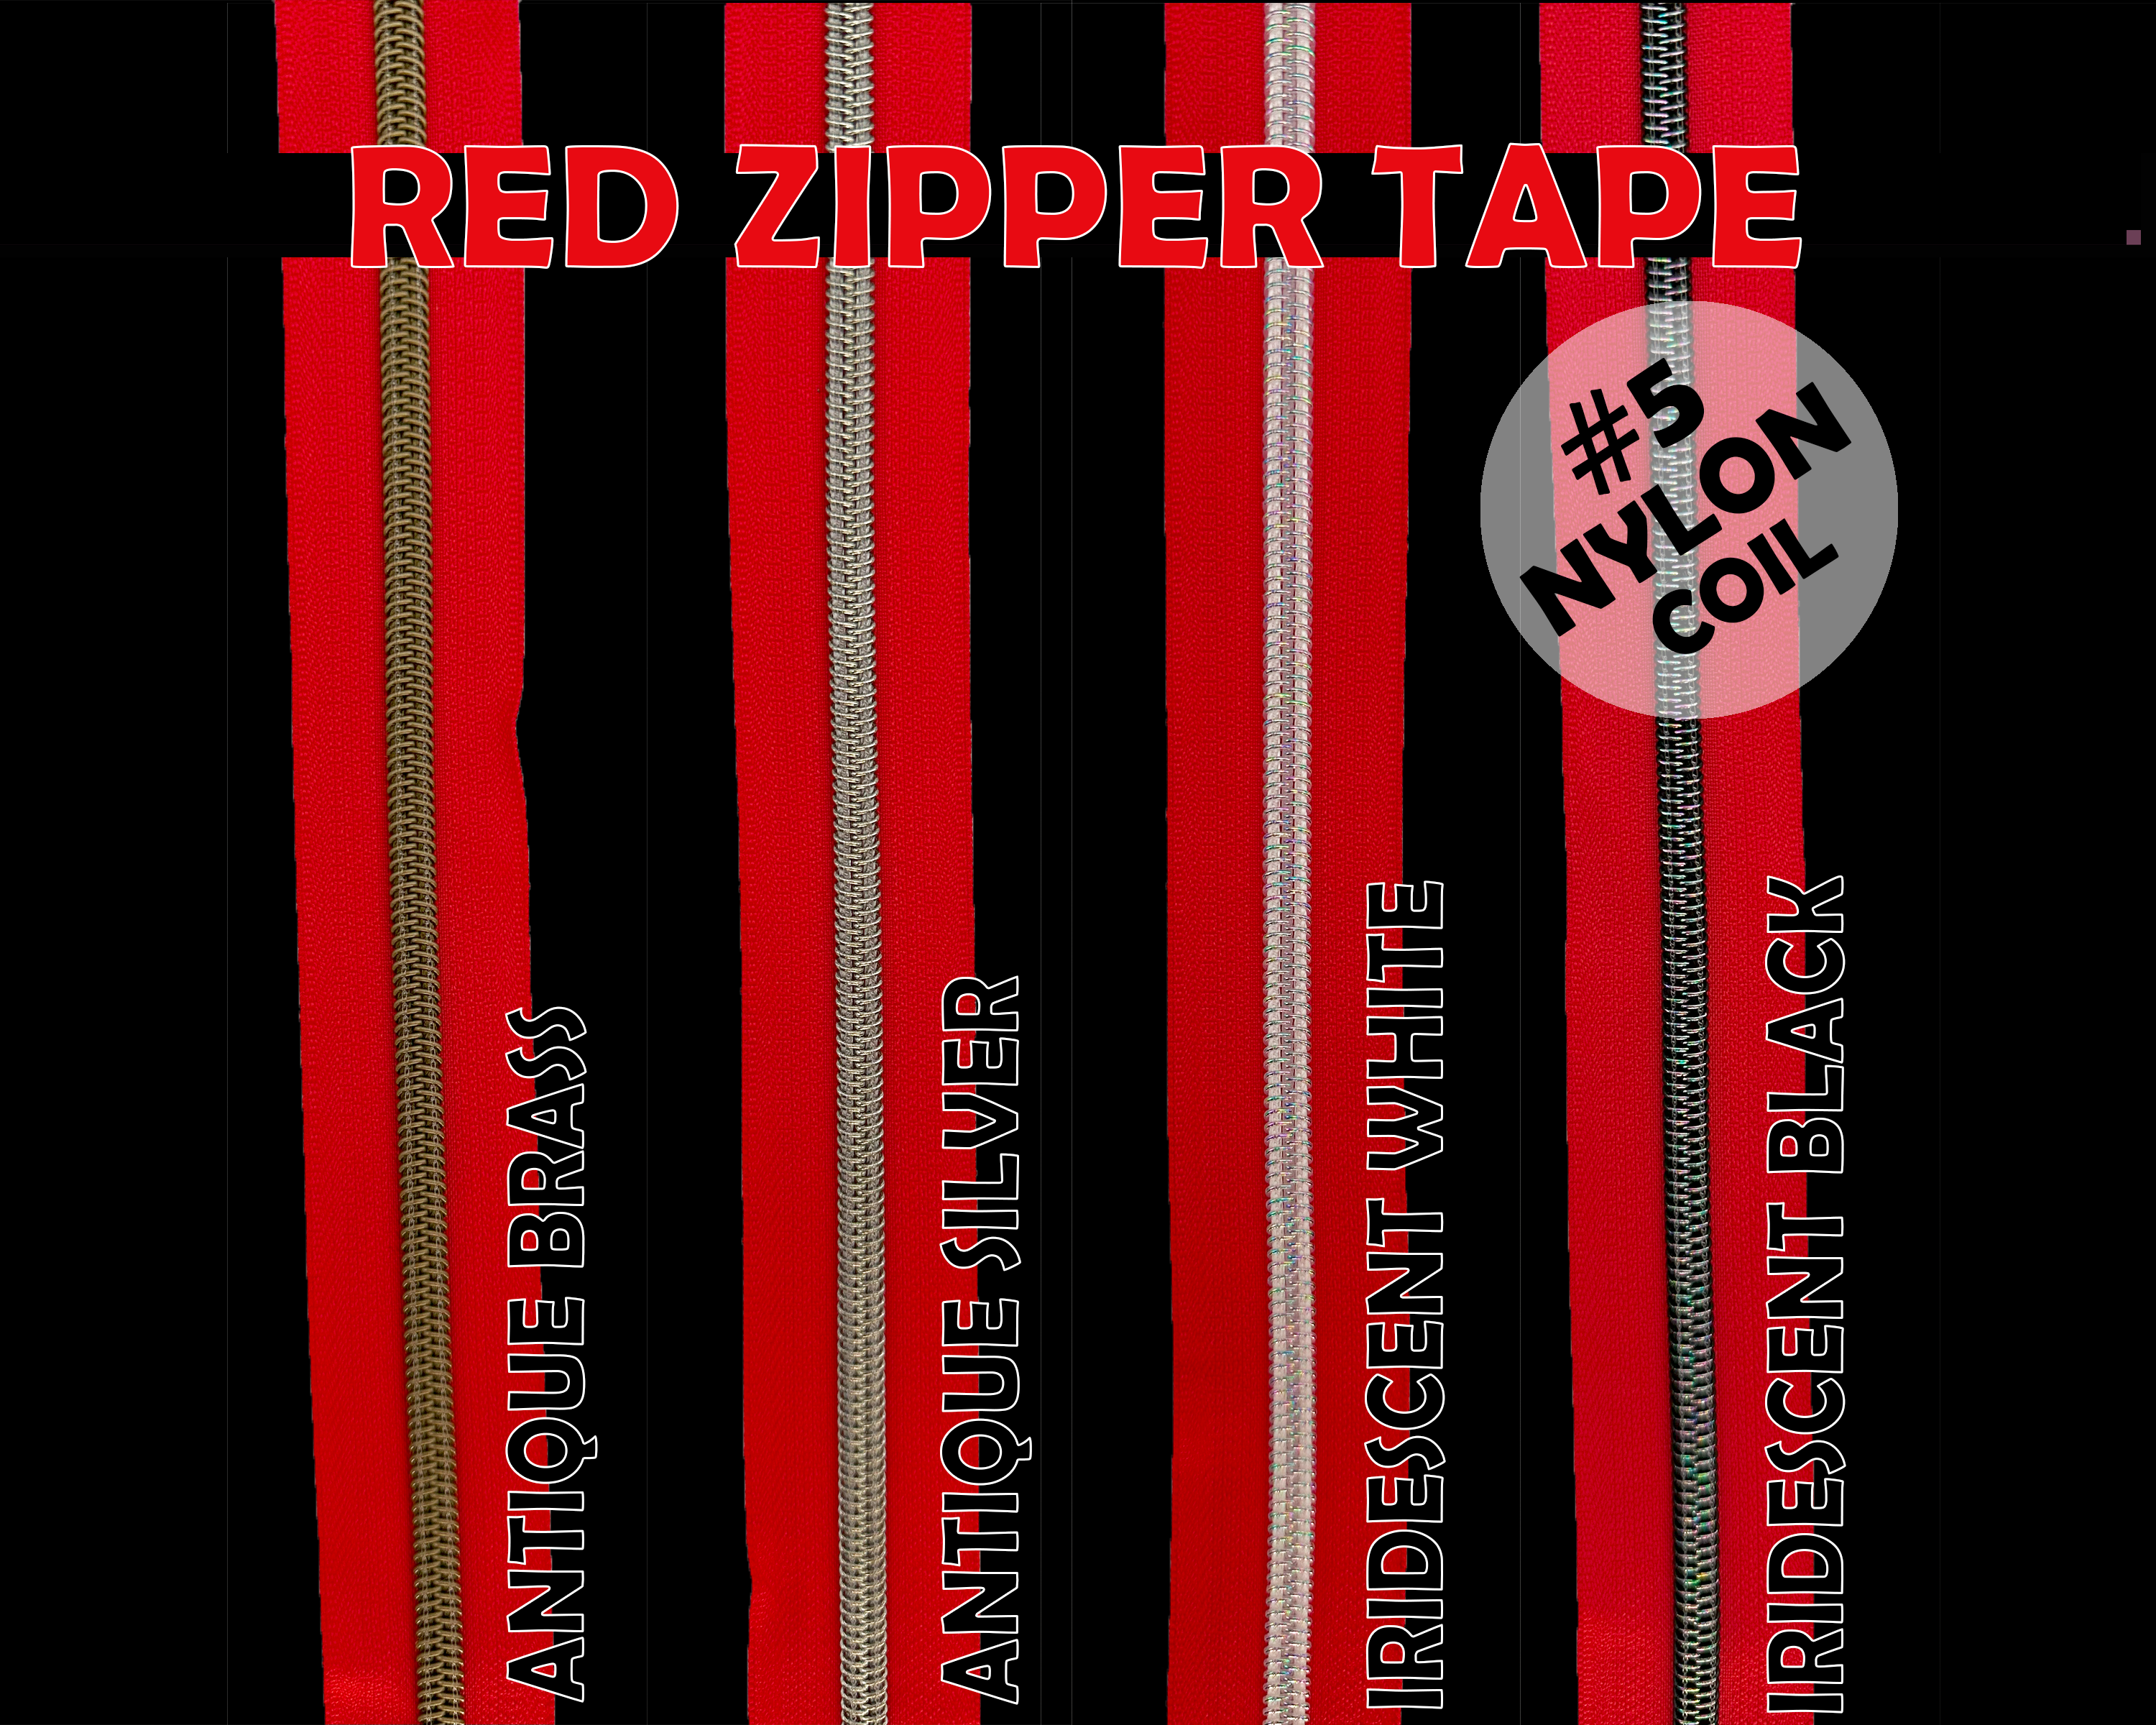 Red Zipper Tape, Size 5 Nylon Coil with various coloured teeth